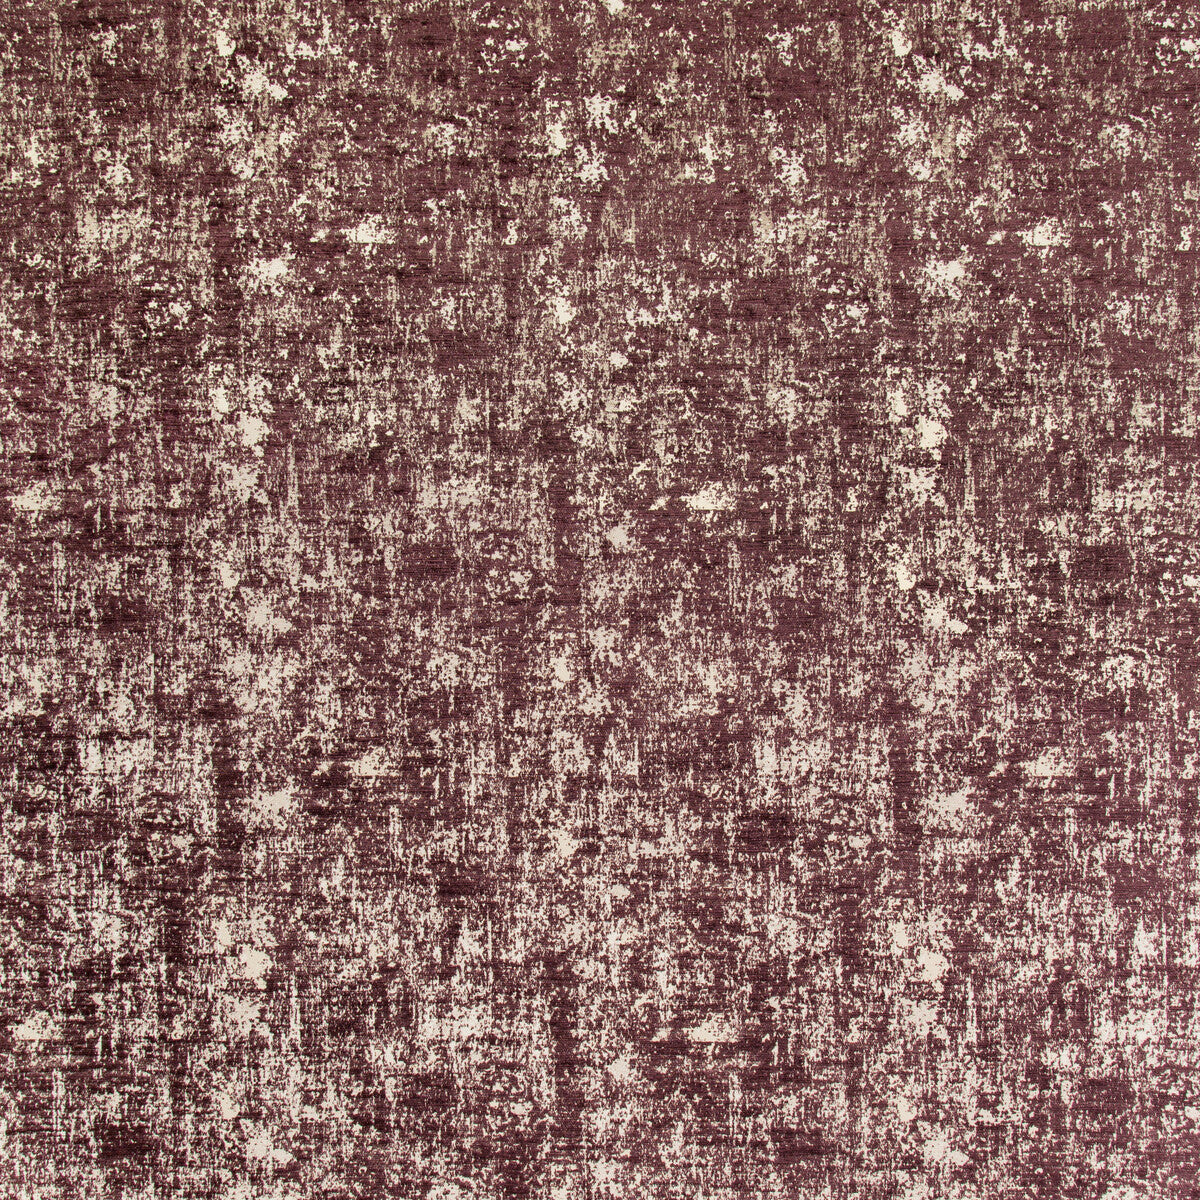 Les Ecorces Woven fabric in wine color - pattern 8017130.909.0 - by Brunschwig &amp; Fils in the Les Ensembliers II collection